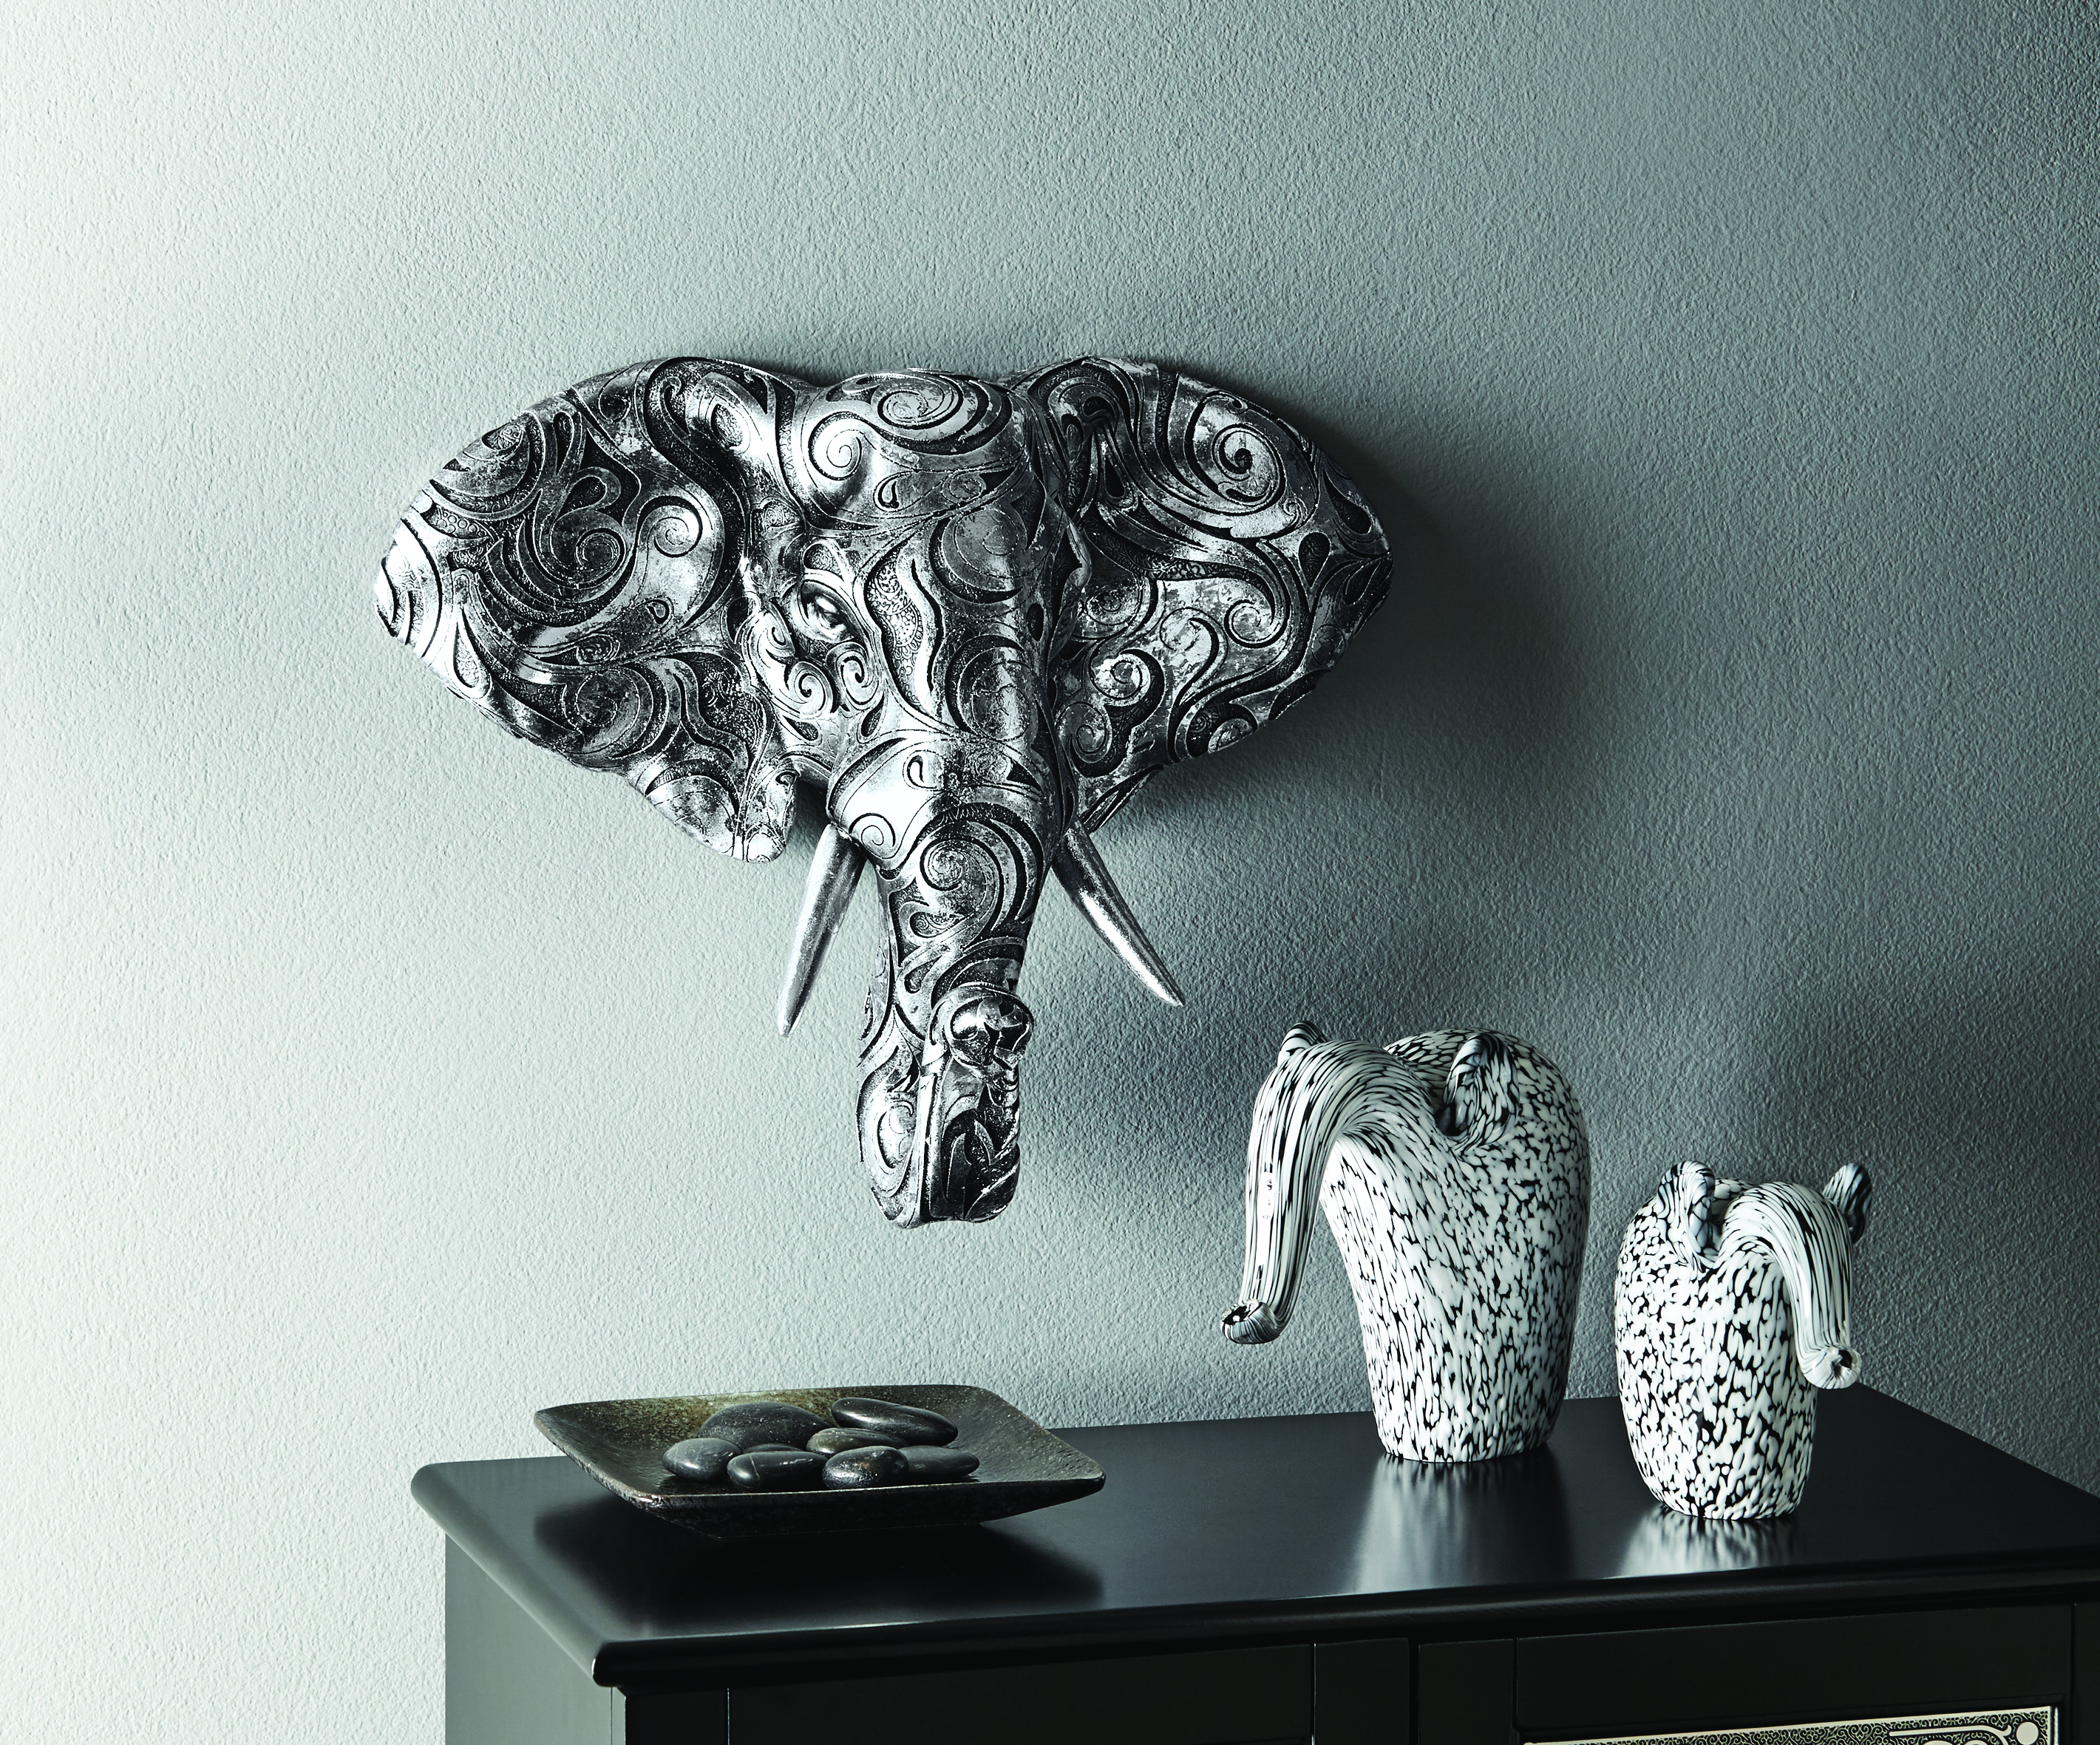 A black and silver swirl elephant head wall plaque and a set of two black and white elephant figurines on a console.